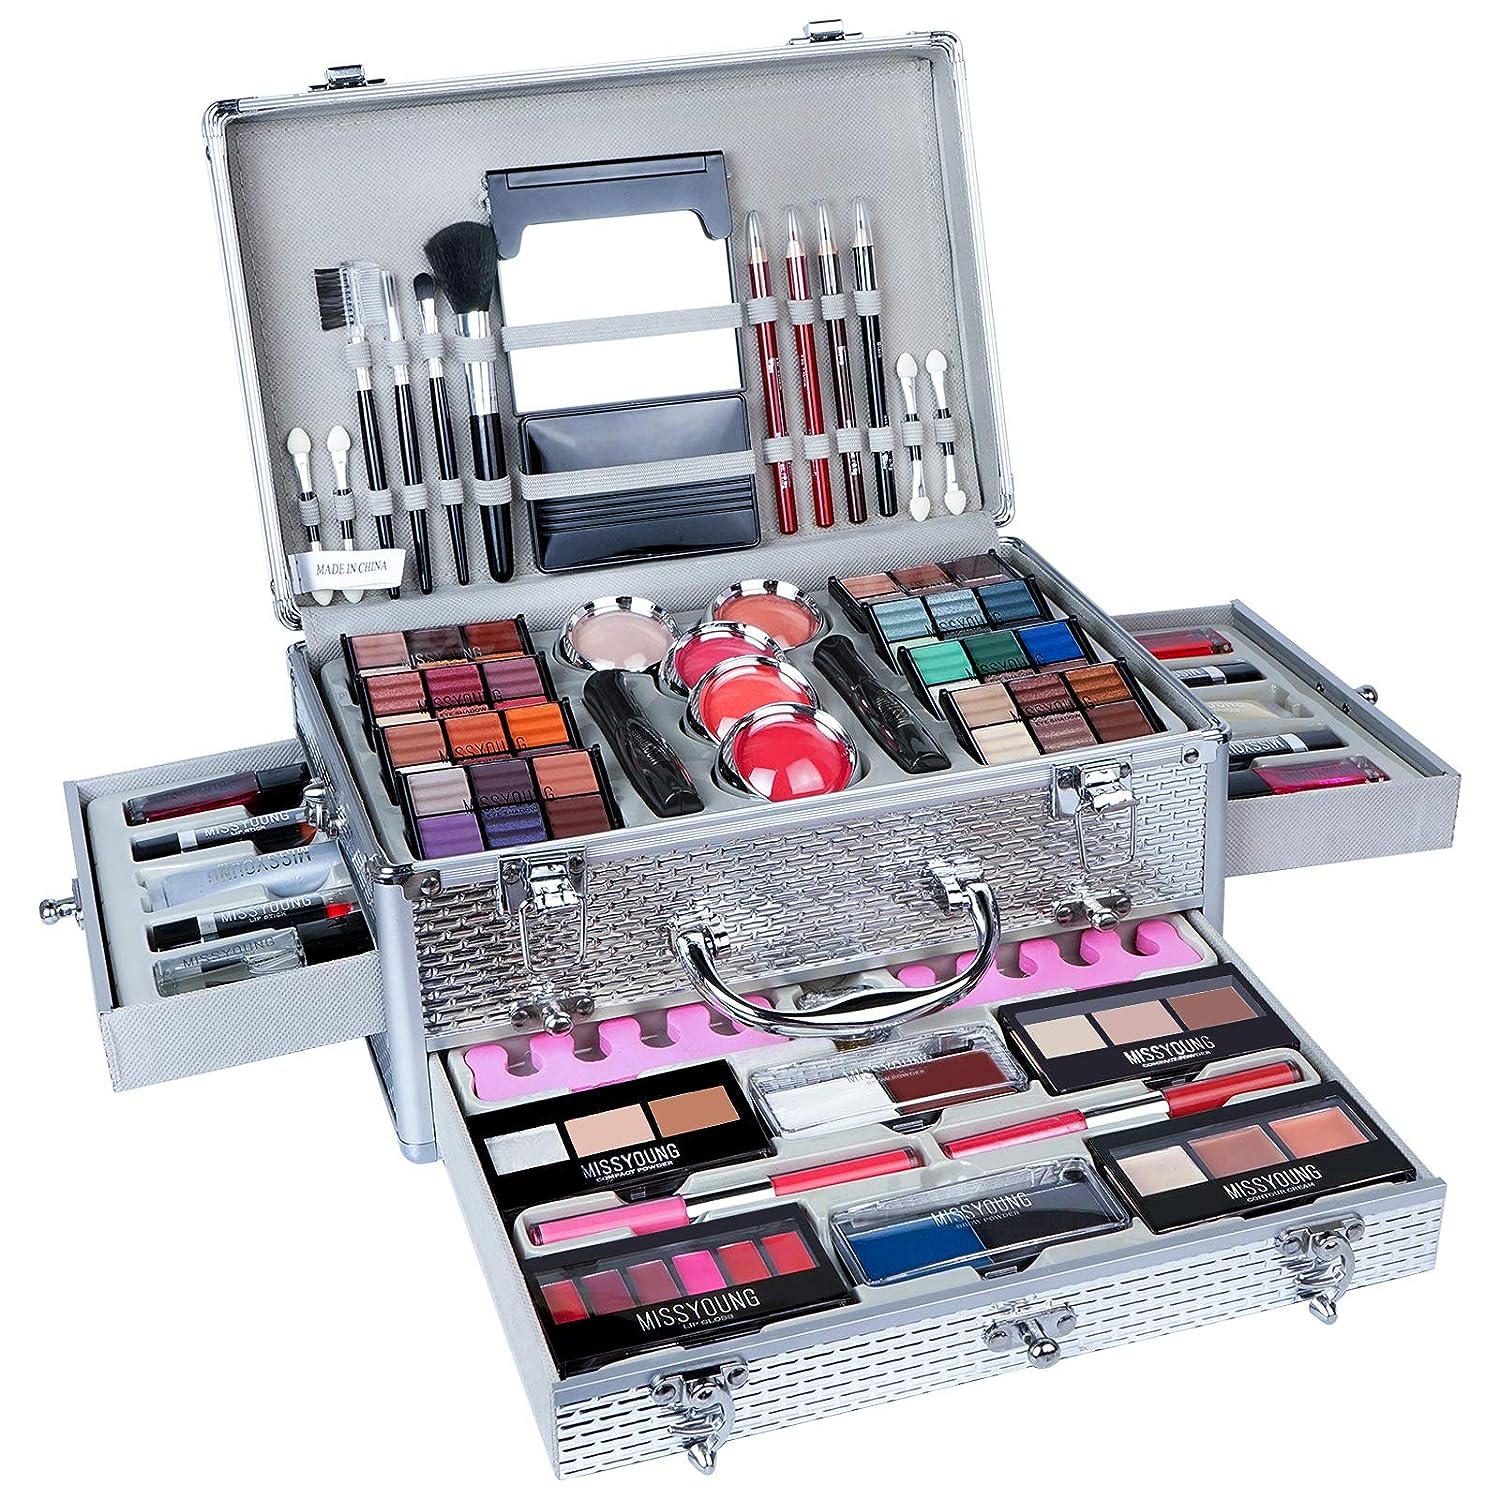 FantasyDay All-in-one Makeup Set Holiday Gift | Full Makeup Kit for Women  Essential Starter Bundle Include Eyeshadow Palette Lipstick Blush Cream